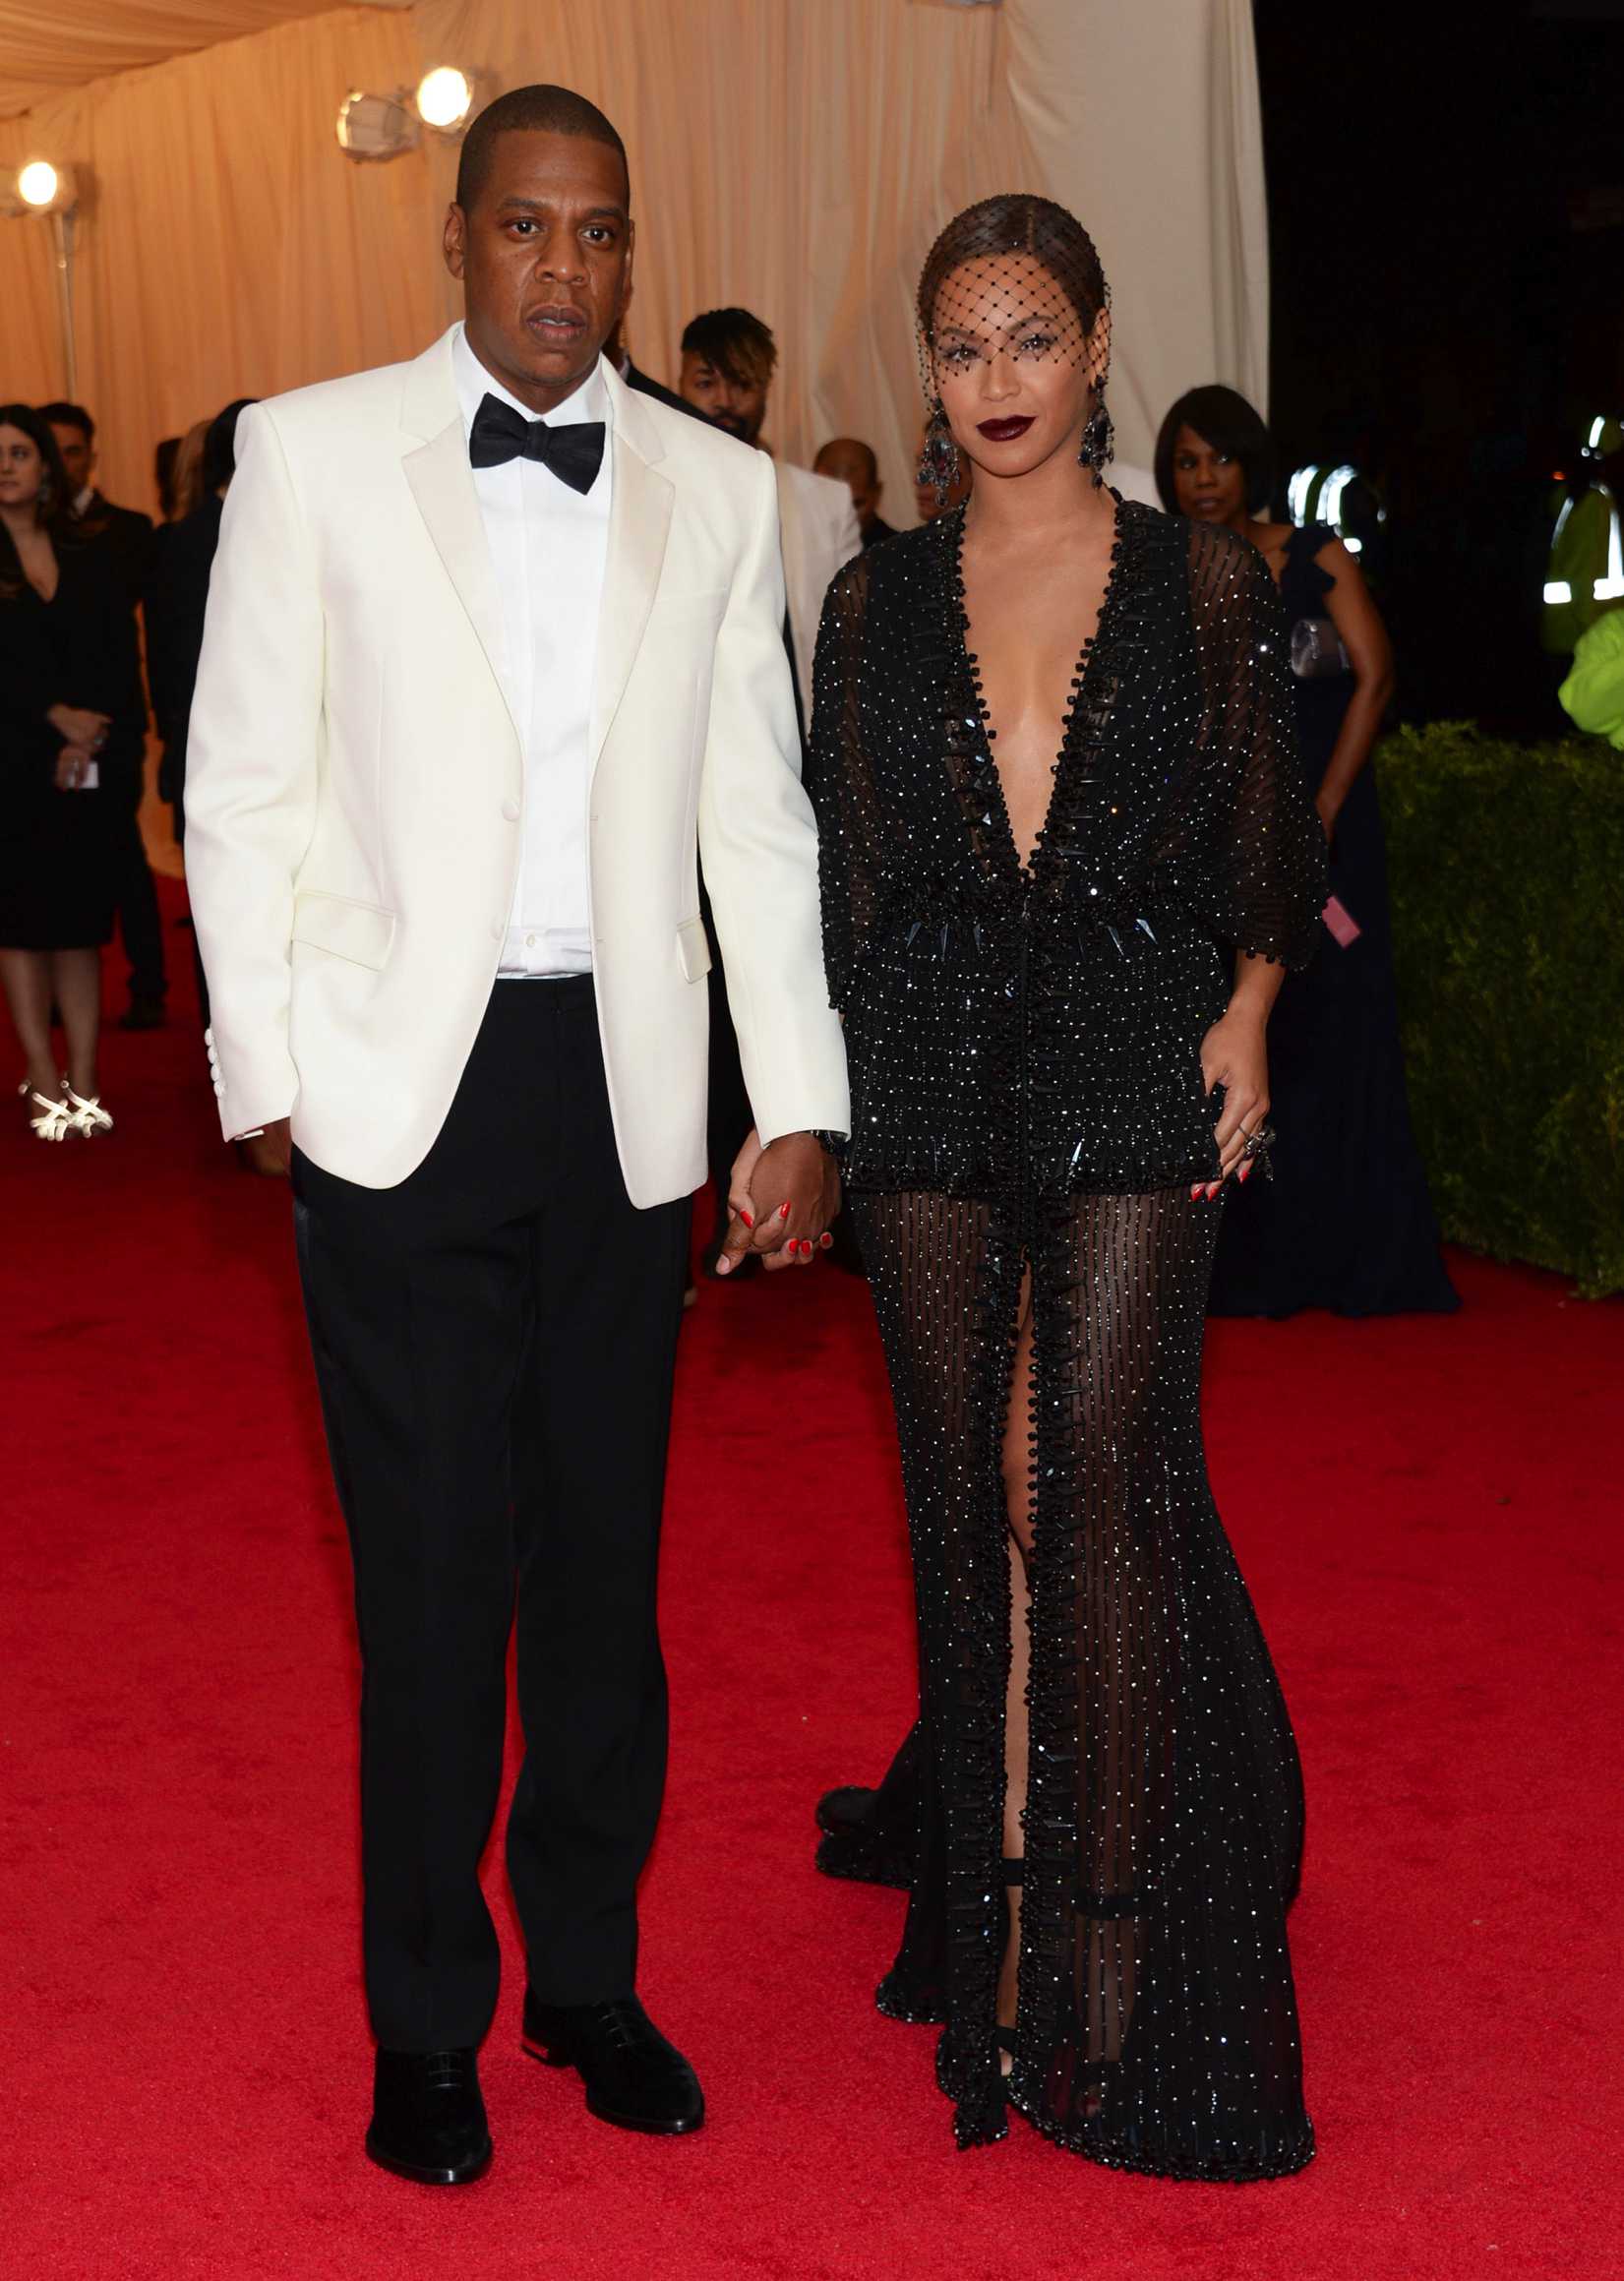 This May 5, 2014 file photo shows Jay Z, left, and Beyonce at The Metropolitan Museum of Art's Costume Institute benefit gala celebrating "Charles James: Beyond Fashion" in New York, on the night when Beyonce's sister allegedly attacked Jay Z. (Evan Agostini—Invision/AP)